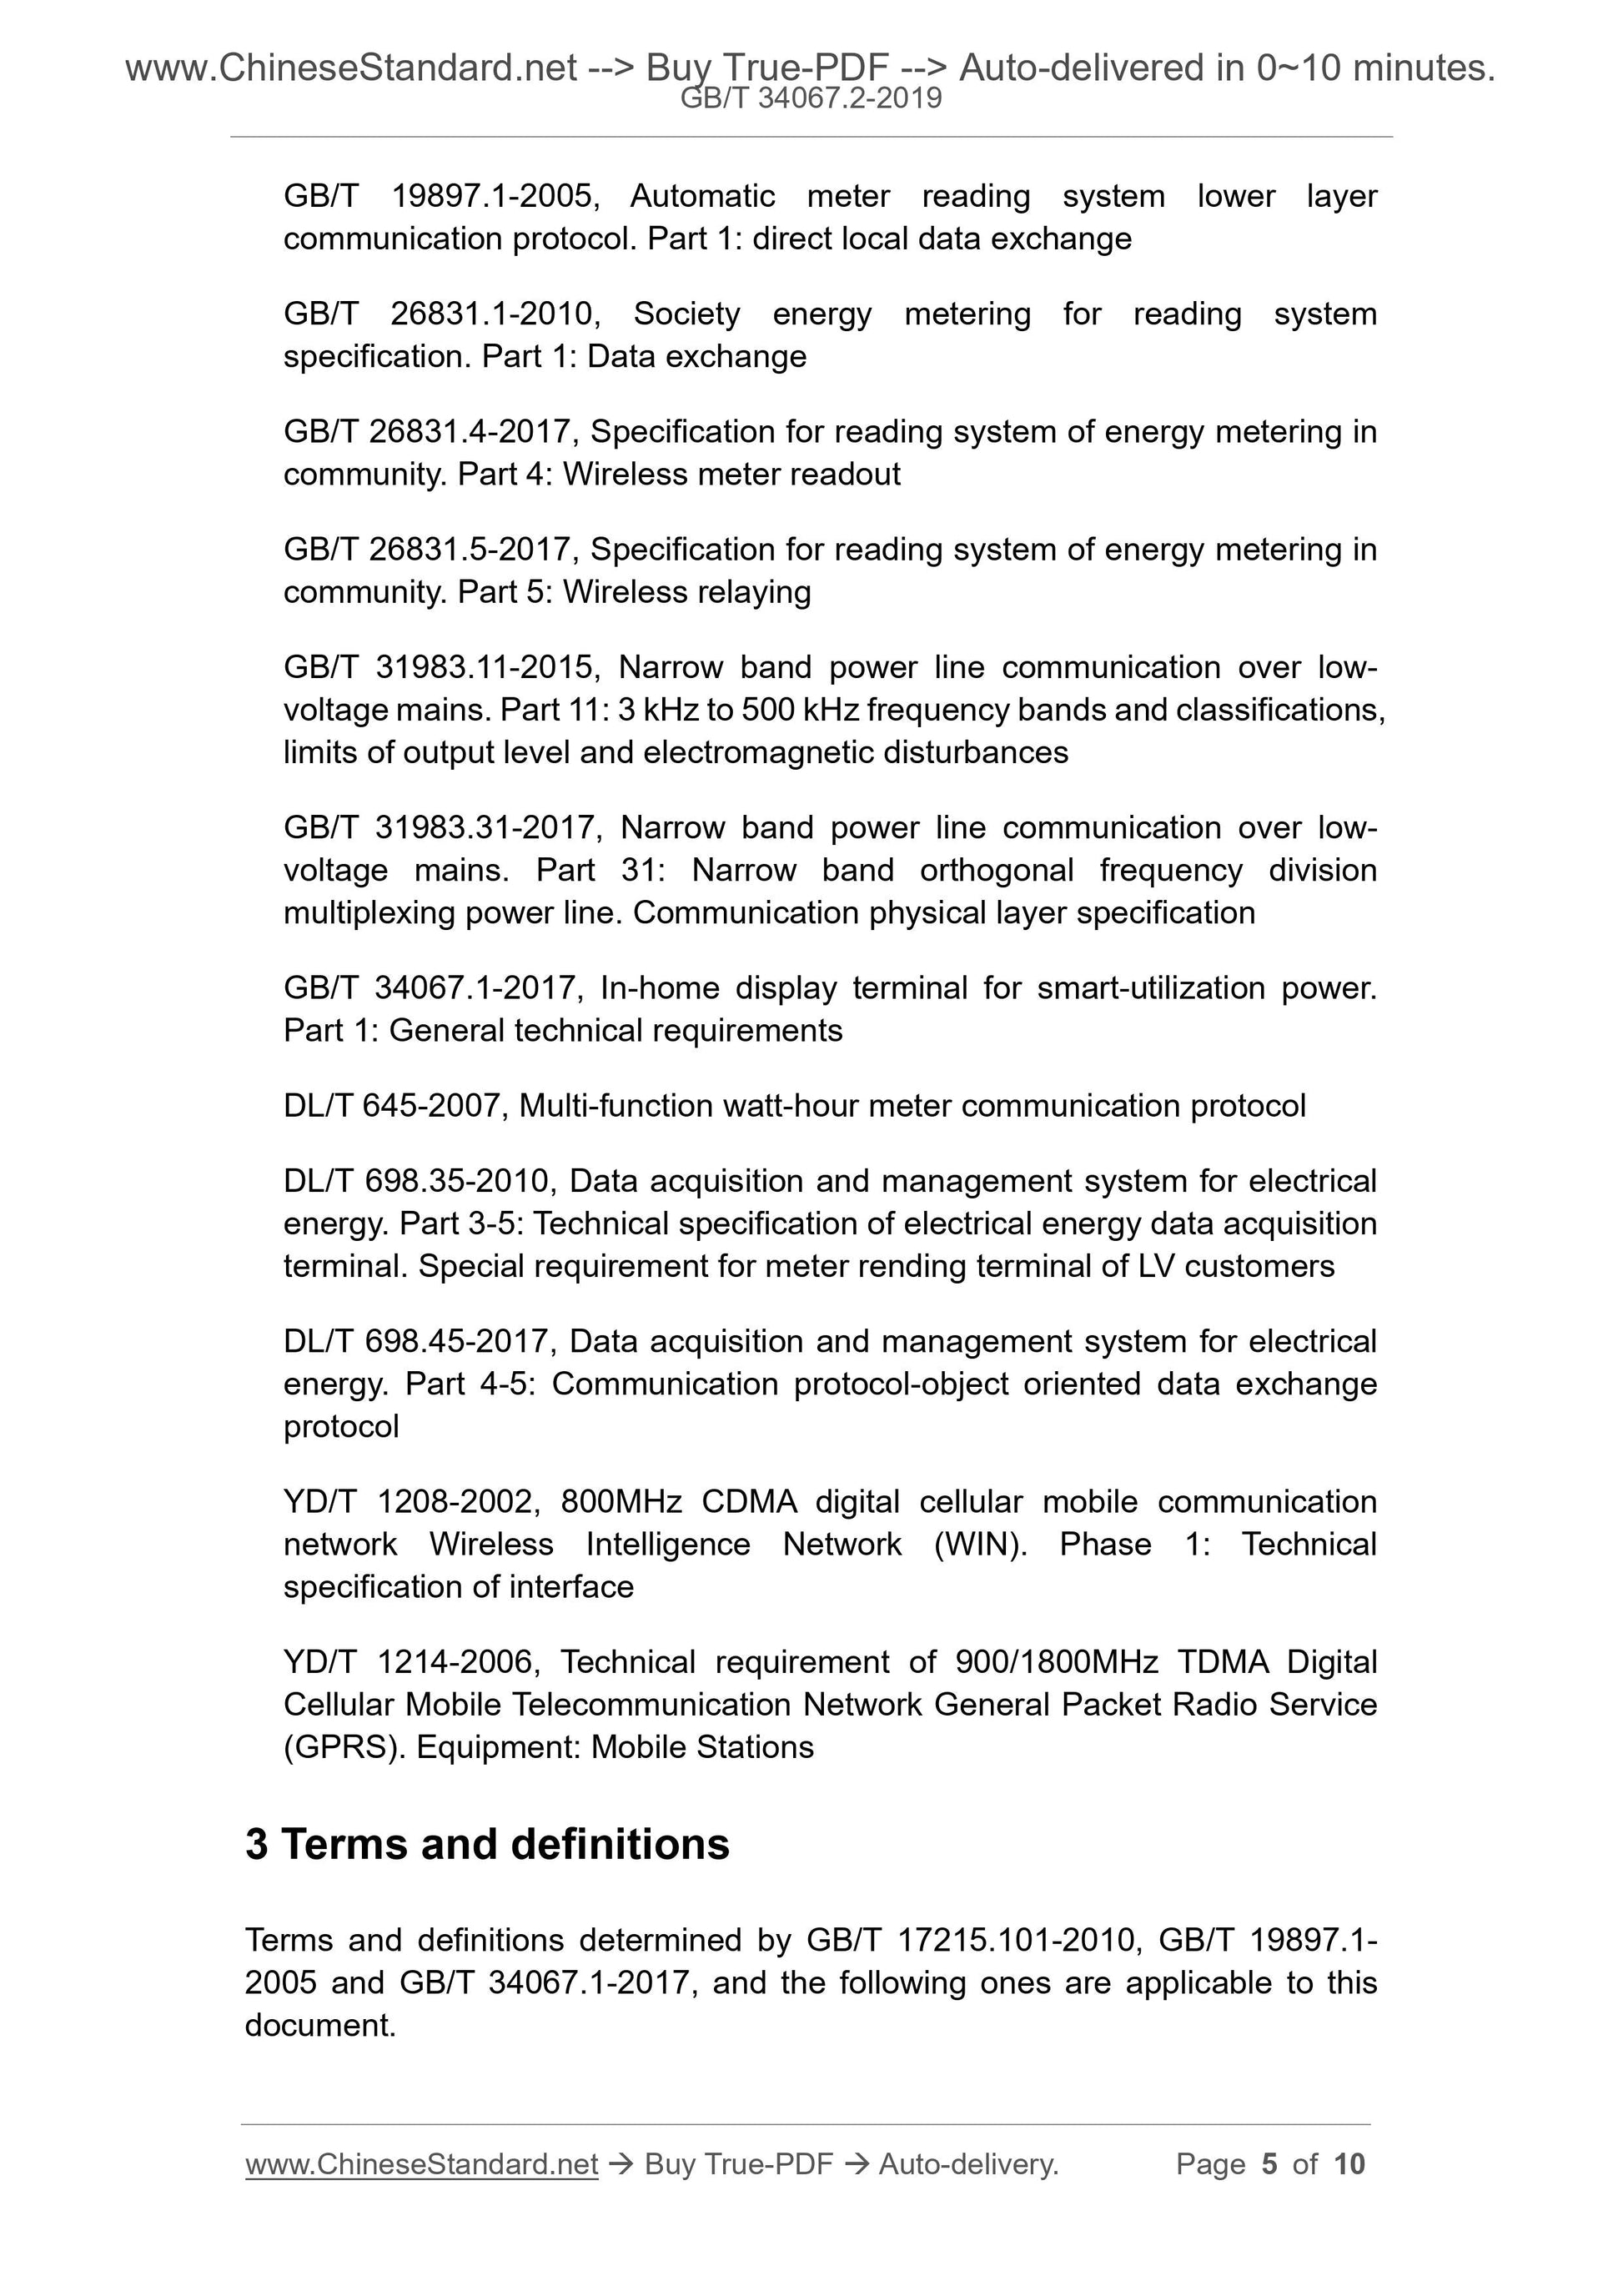 GB/T 34067.2-2019 Page 4